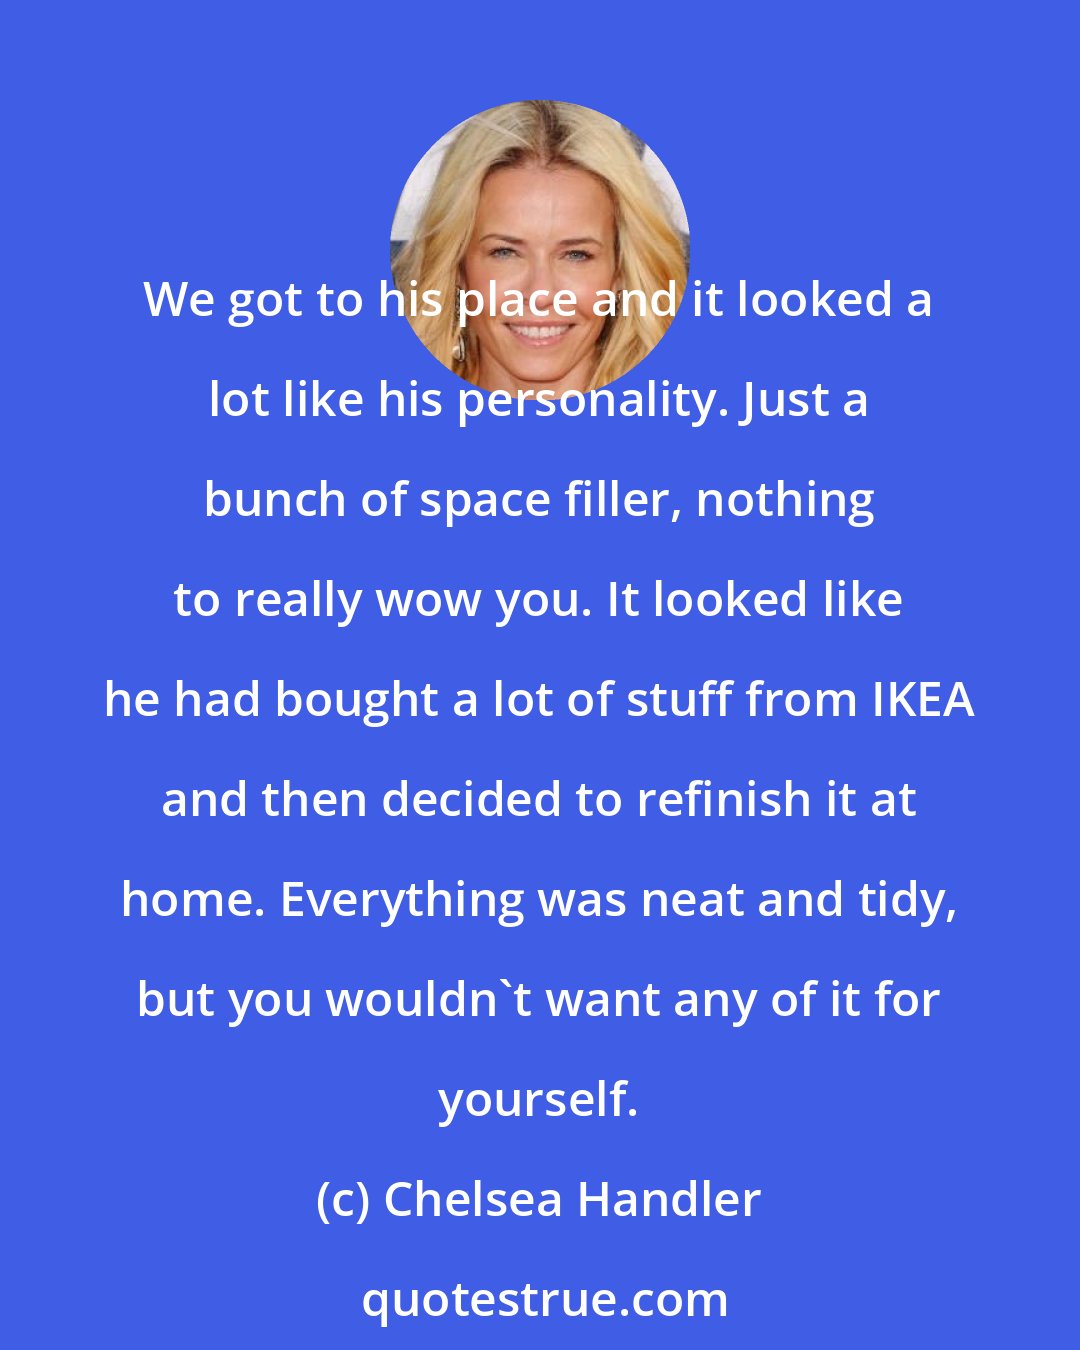 Chelsea Handler: We got to his place and it looked a lot like his personality. Just a bunch of space filler, nothing to really wow you. It looked like he had bought a lot of stuff from IKEA and then decided to refinish it at home. Everything was neat and tidy, but you wouldn't want any of it for yourself.